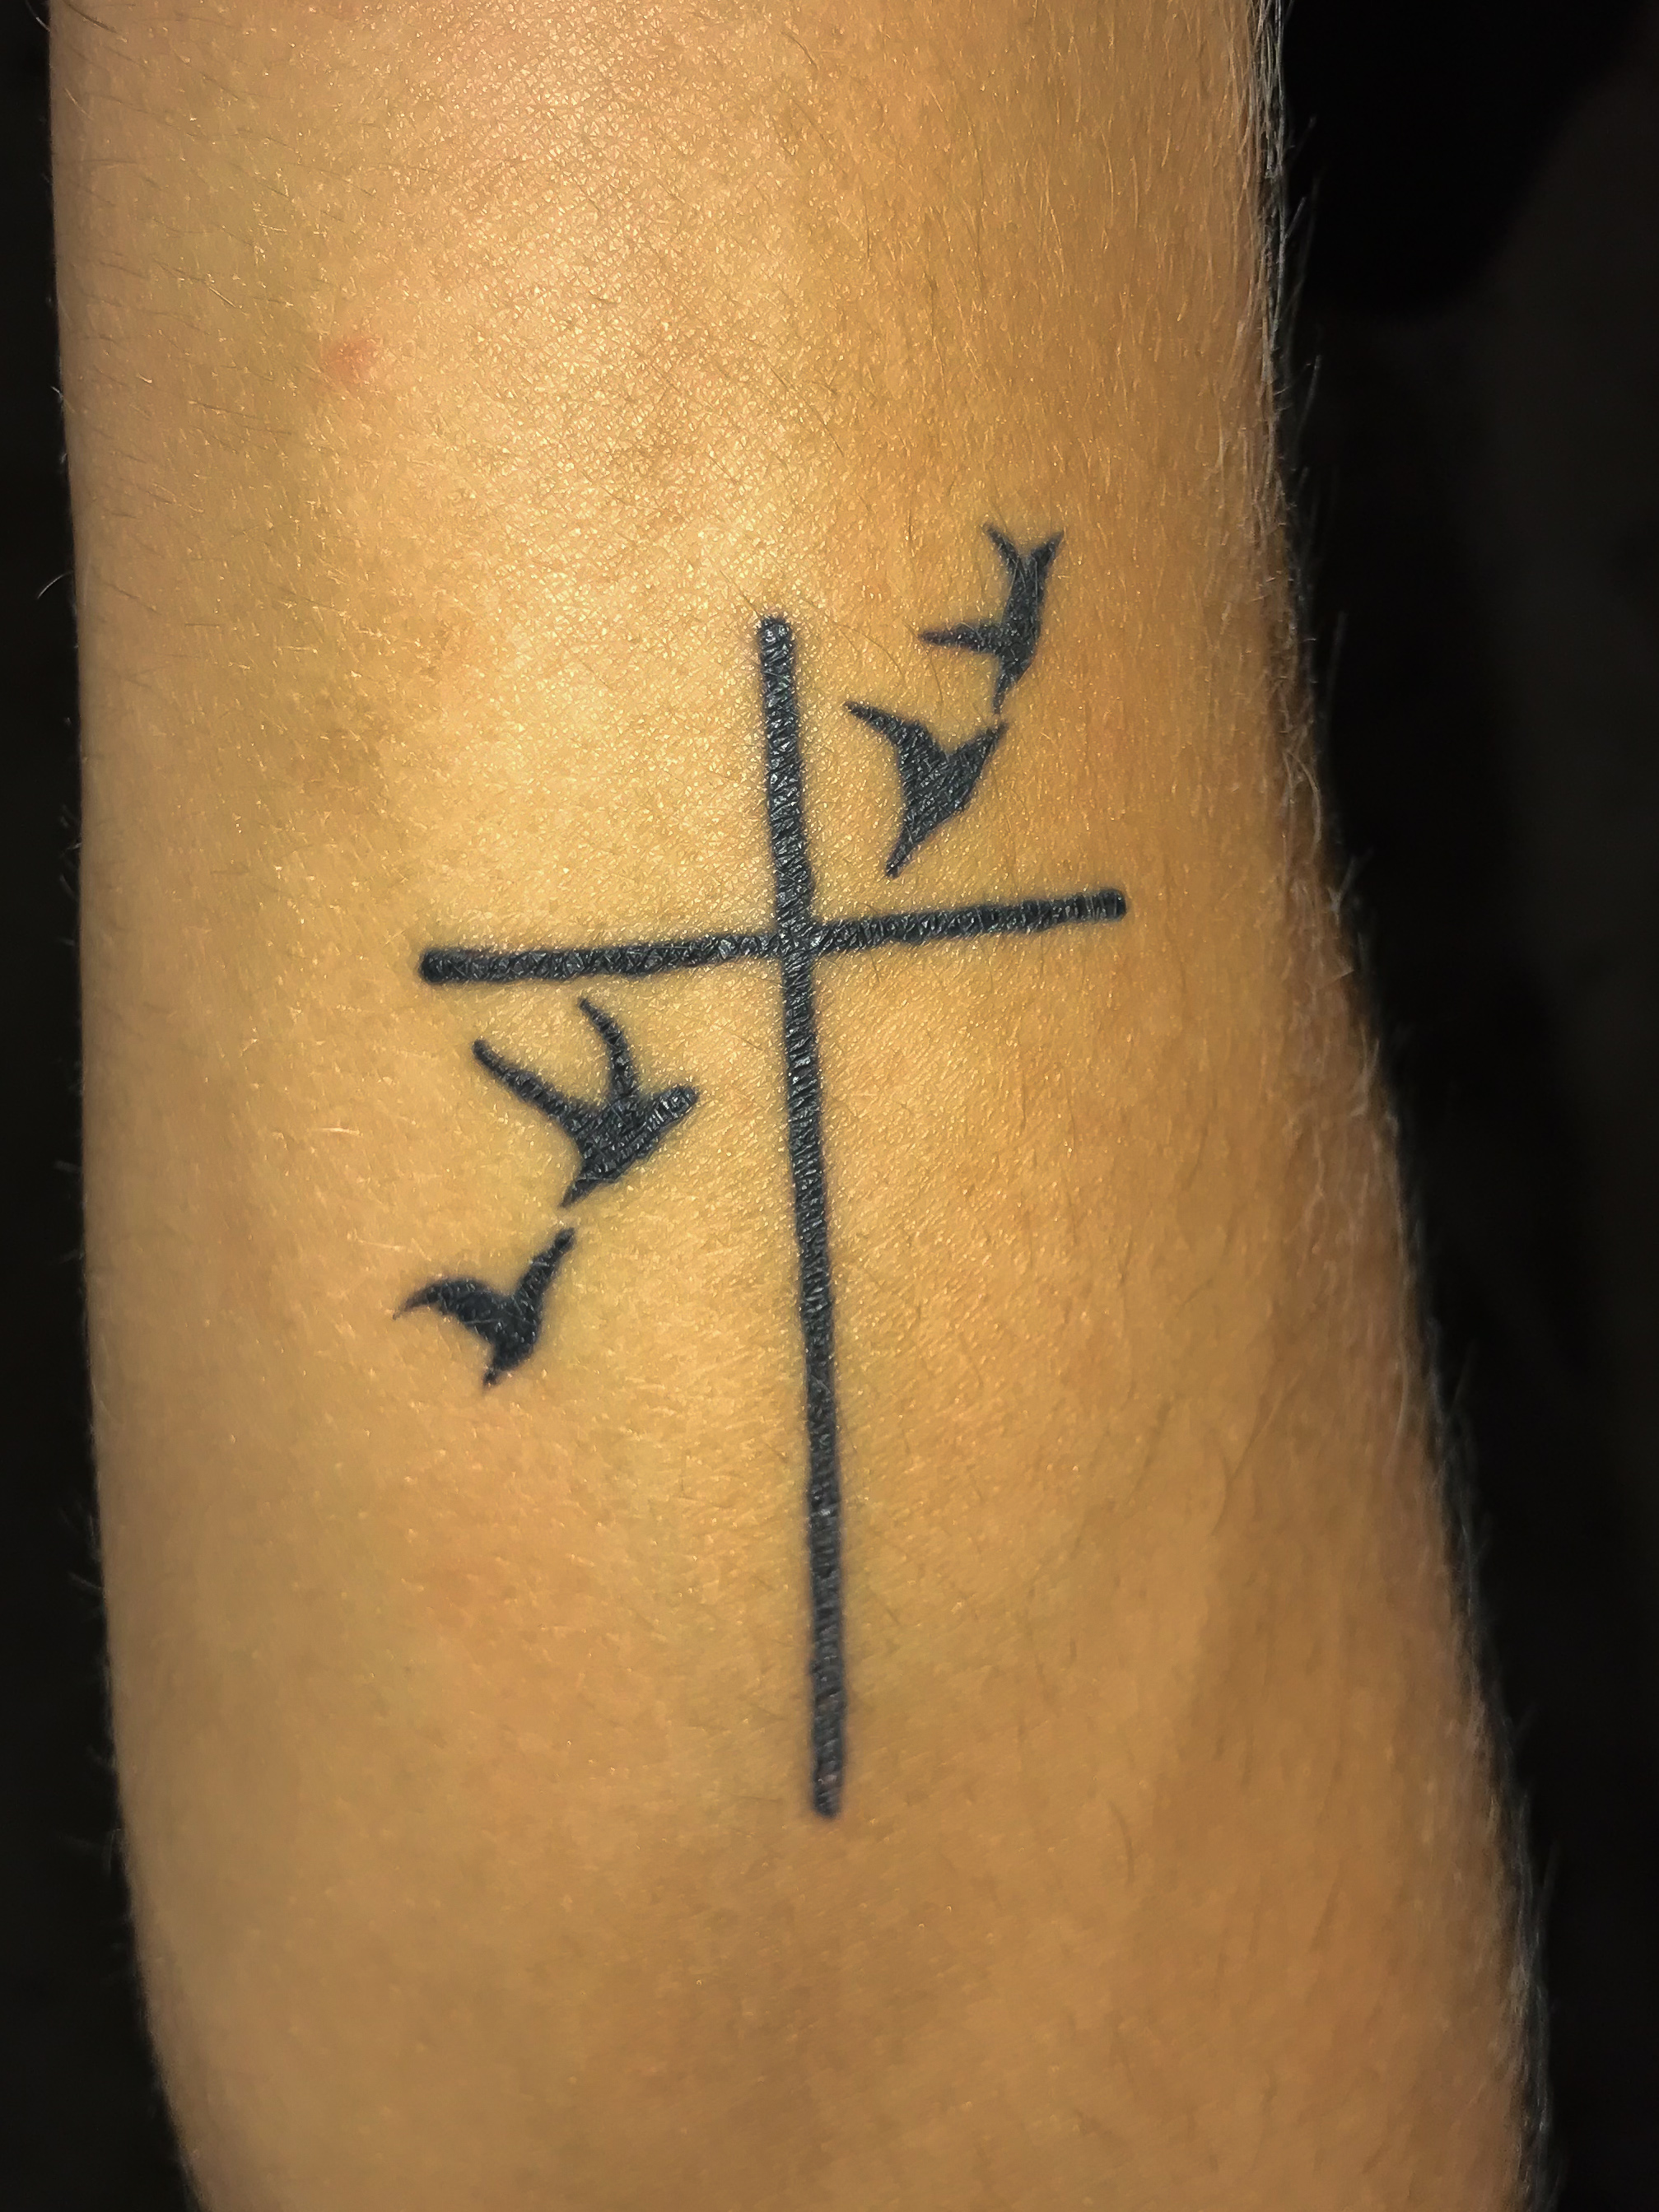 This is Jacob Holcombe. He got this tattoo before he moved to North Greenville. This tattoo symbolizes Holcombes faith and tells others that he is someone you can talk to about Christianity.